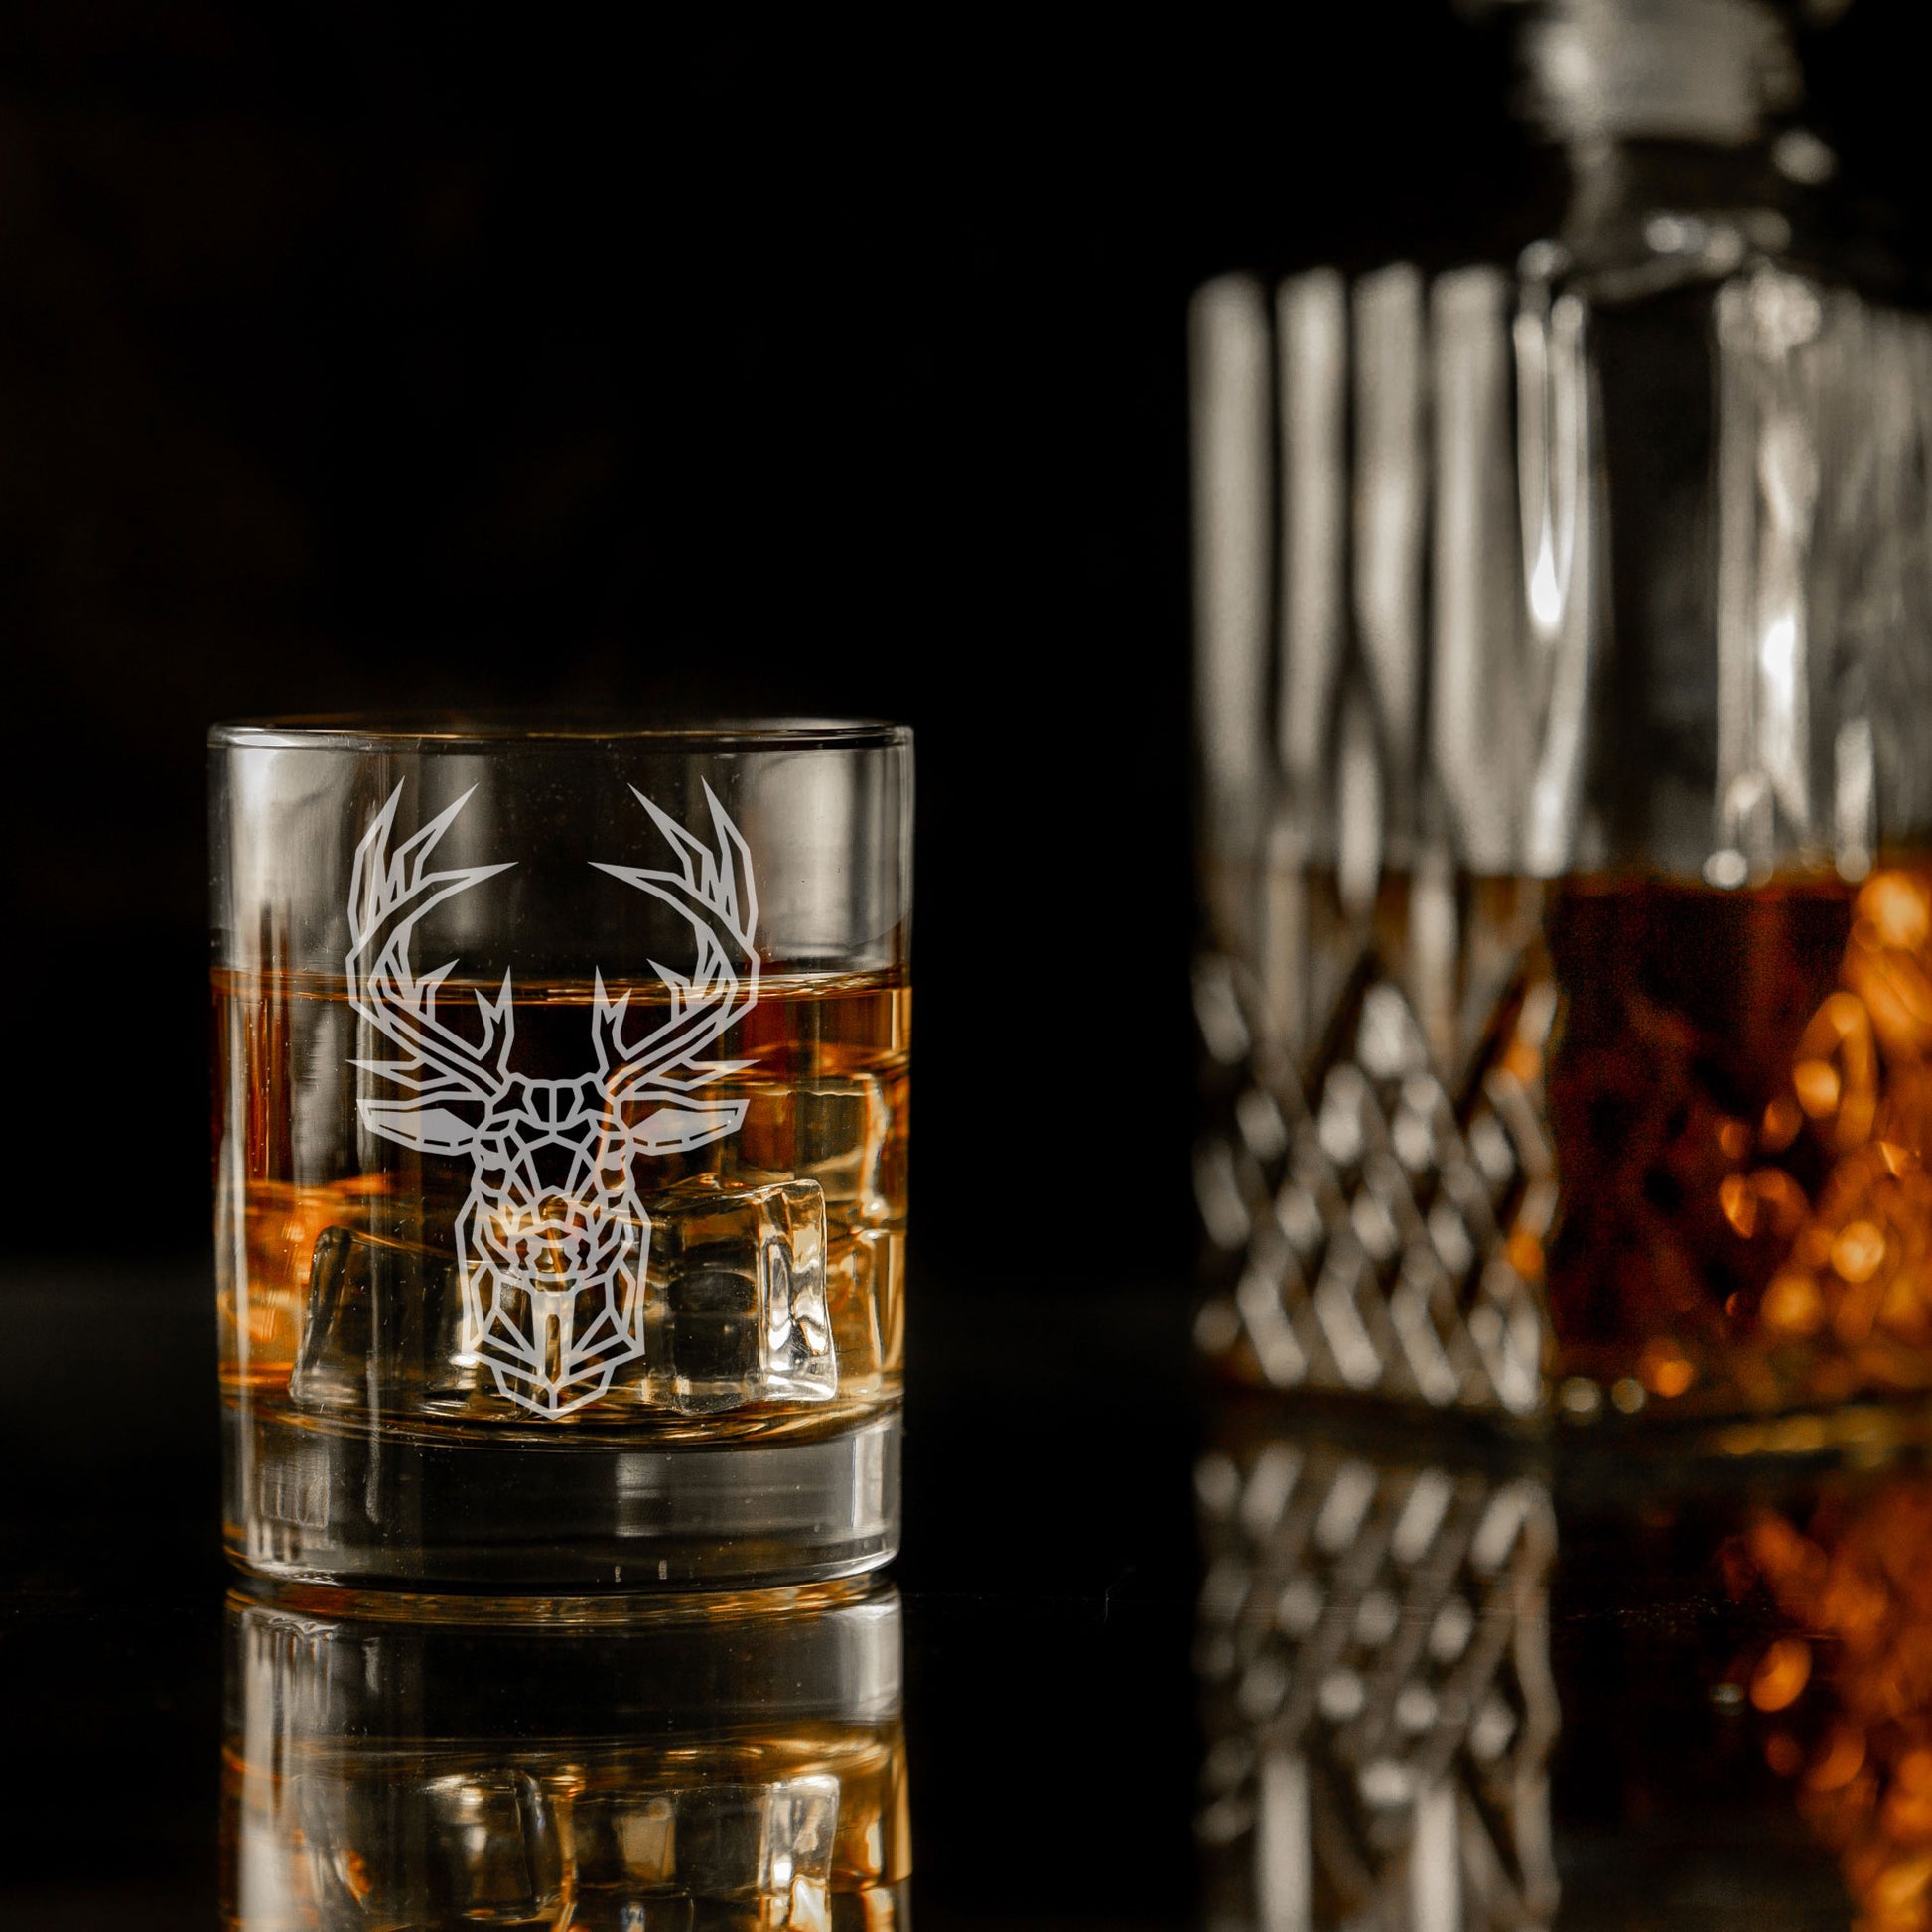 Stag Engraved Whisky Glass  - Always Looking Good -   